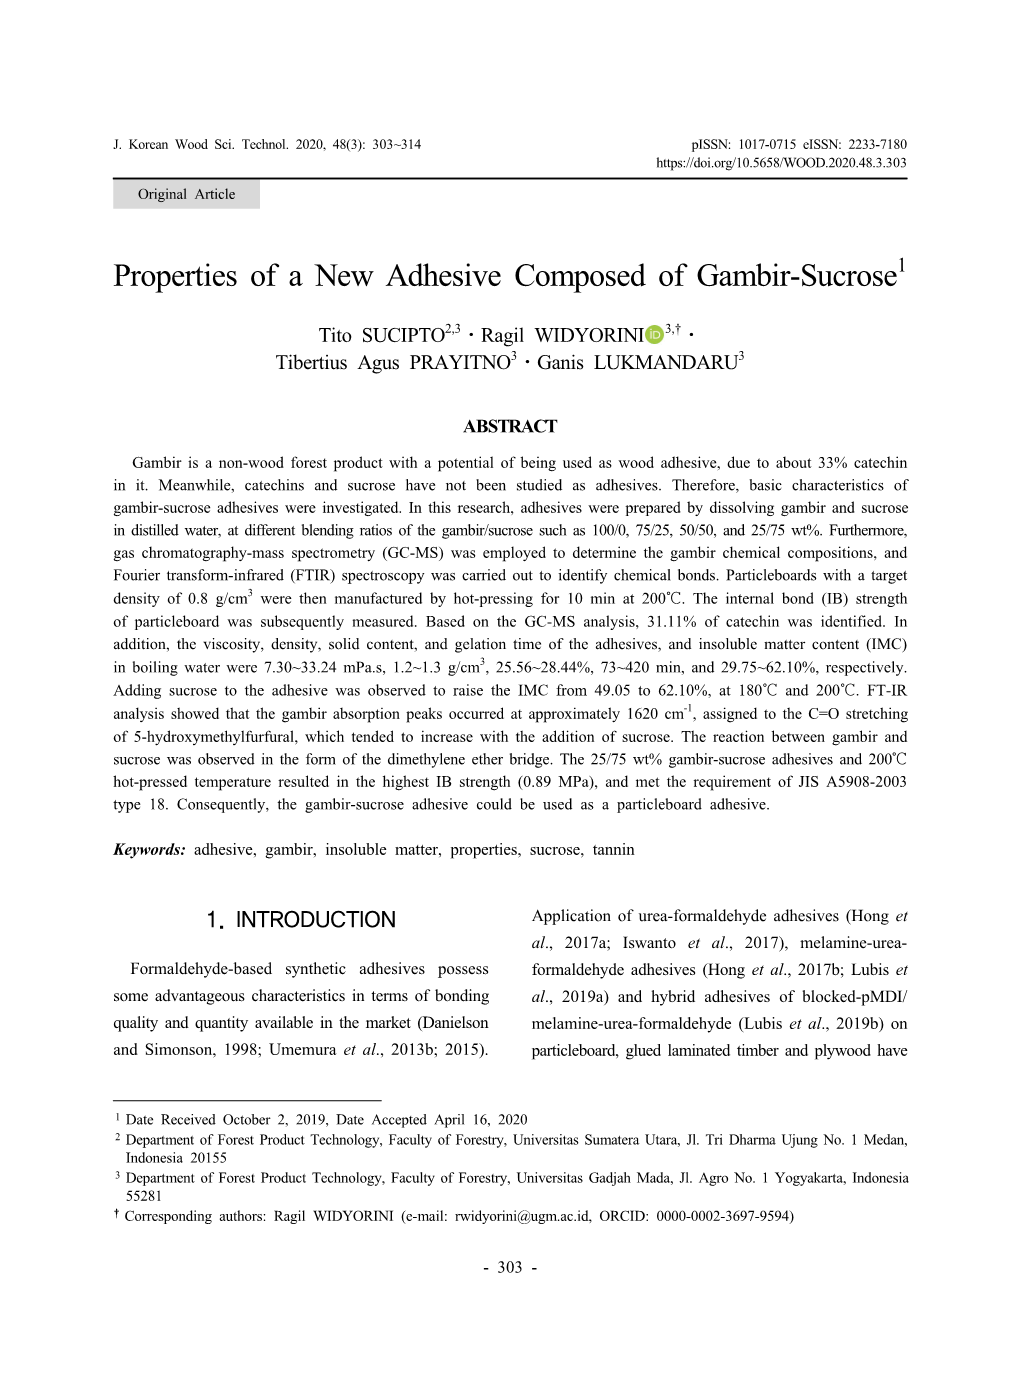 Properties of a New Adhesive Composed of Gambir-Sucrose1